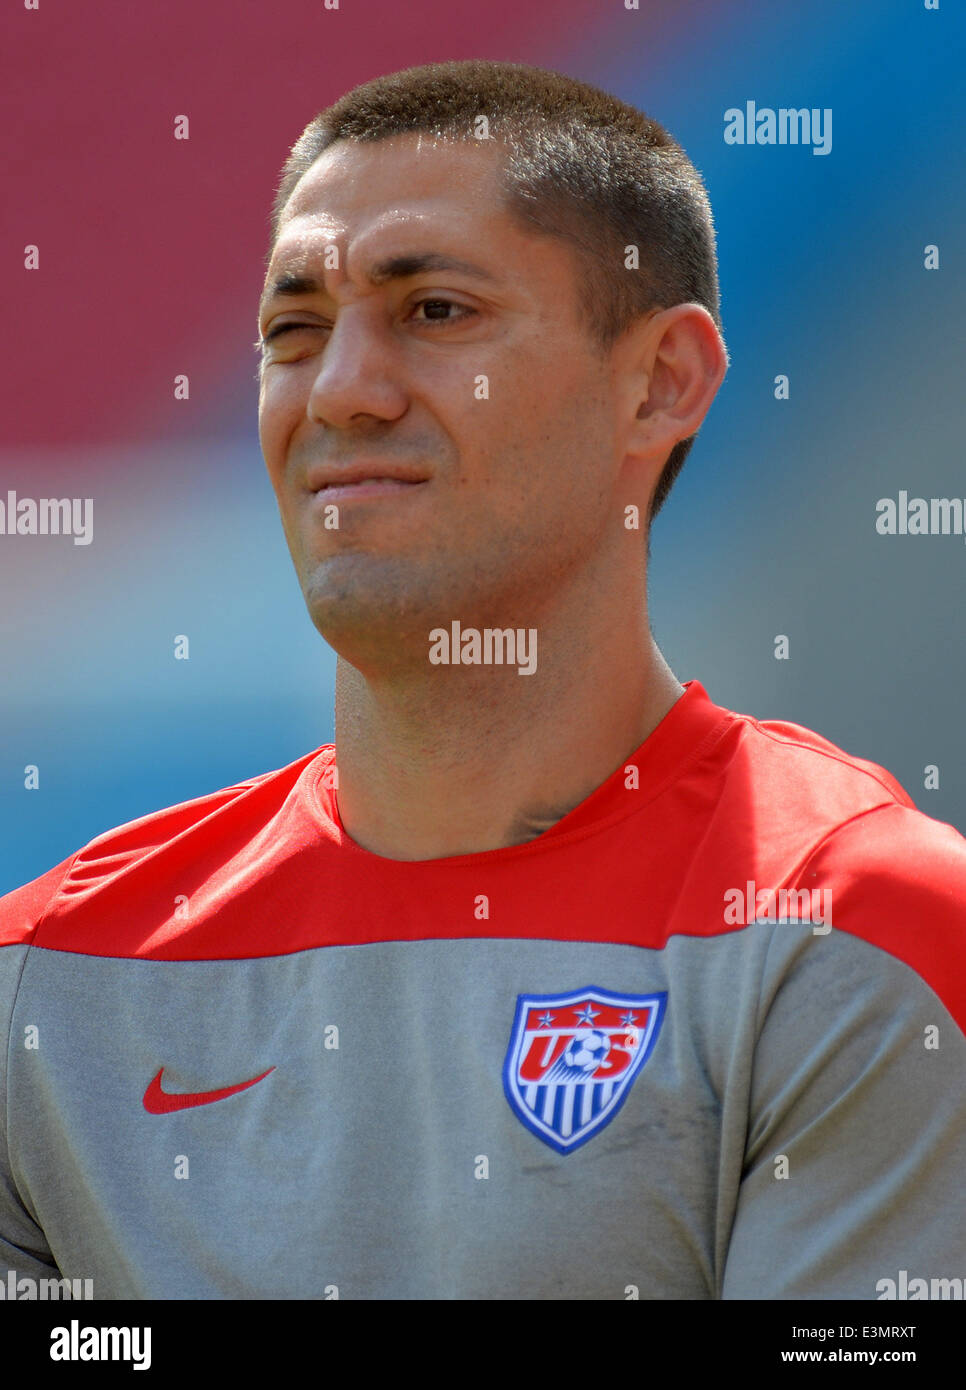 Recife, Brazil. 25th June, 2014. Recife, Brazil. 25th June, 2014. US national soccer player Clint Dempsey during a training session of the US national soccer team in the Arena Pernambuco in Recife, Brazil, 25 June 2014. The FIFA World Cup 2014 will take place in Brazil from 12 June to 13 July 2014. Credit:  dpa/Alamy Live News Stock Photo